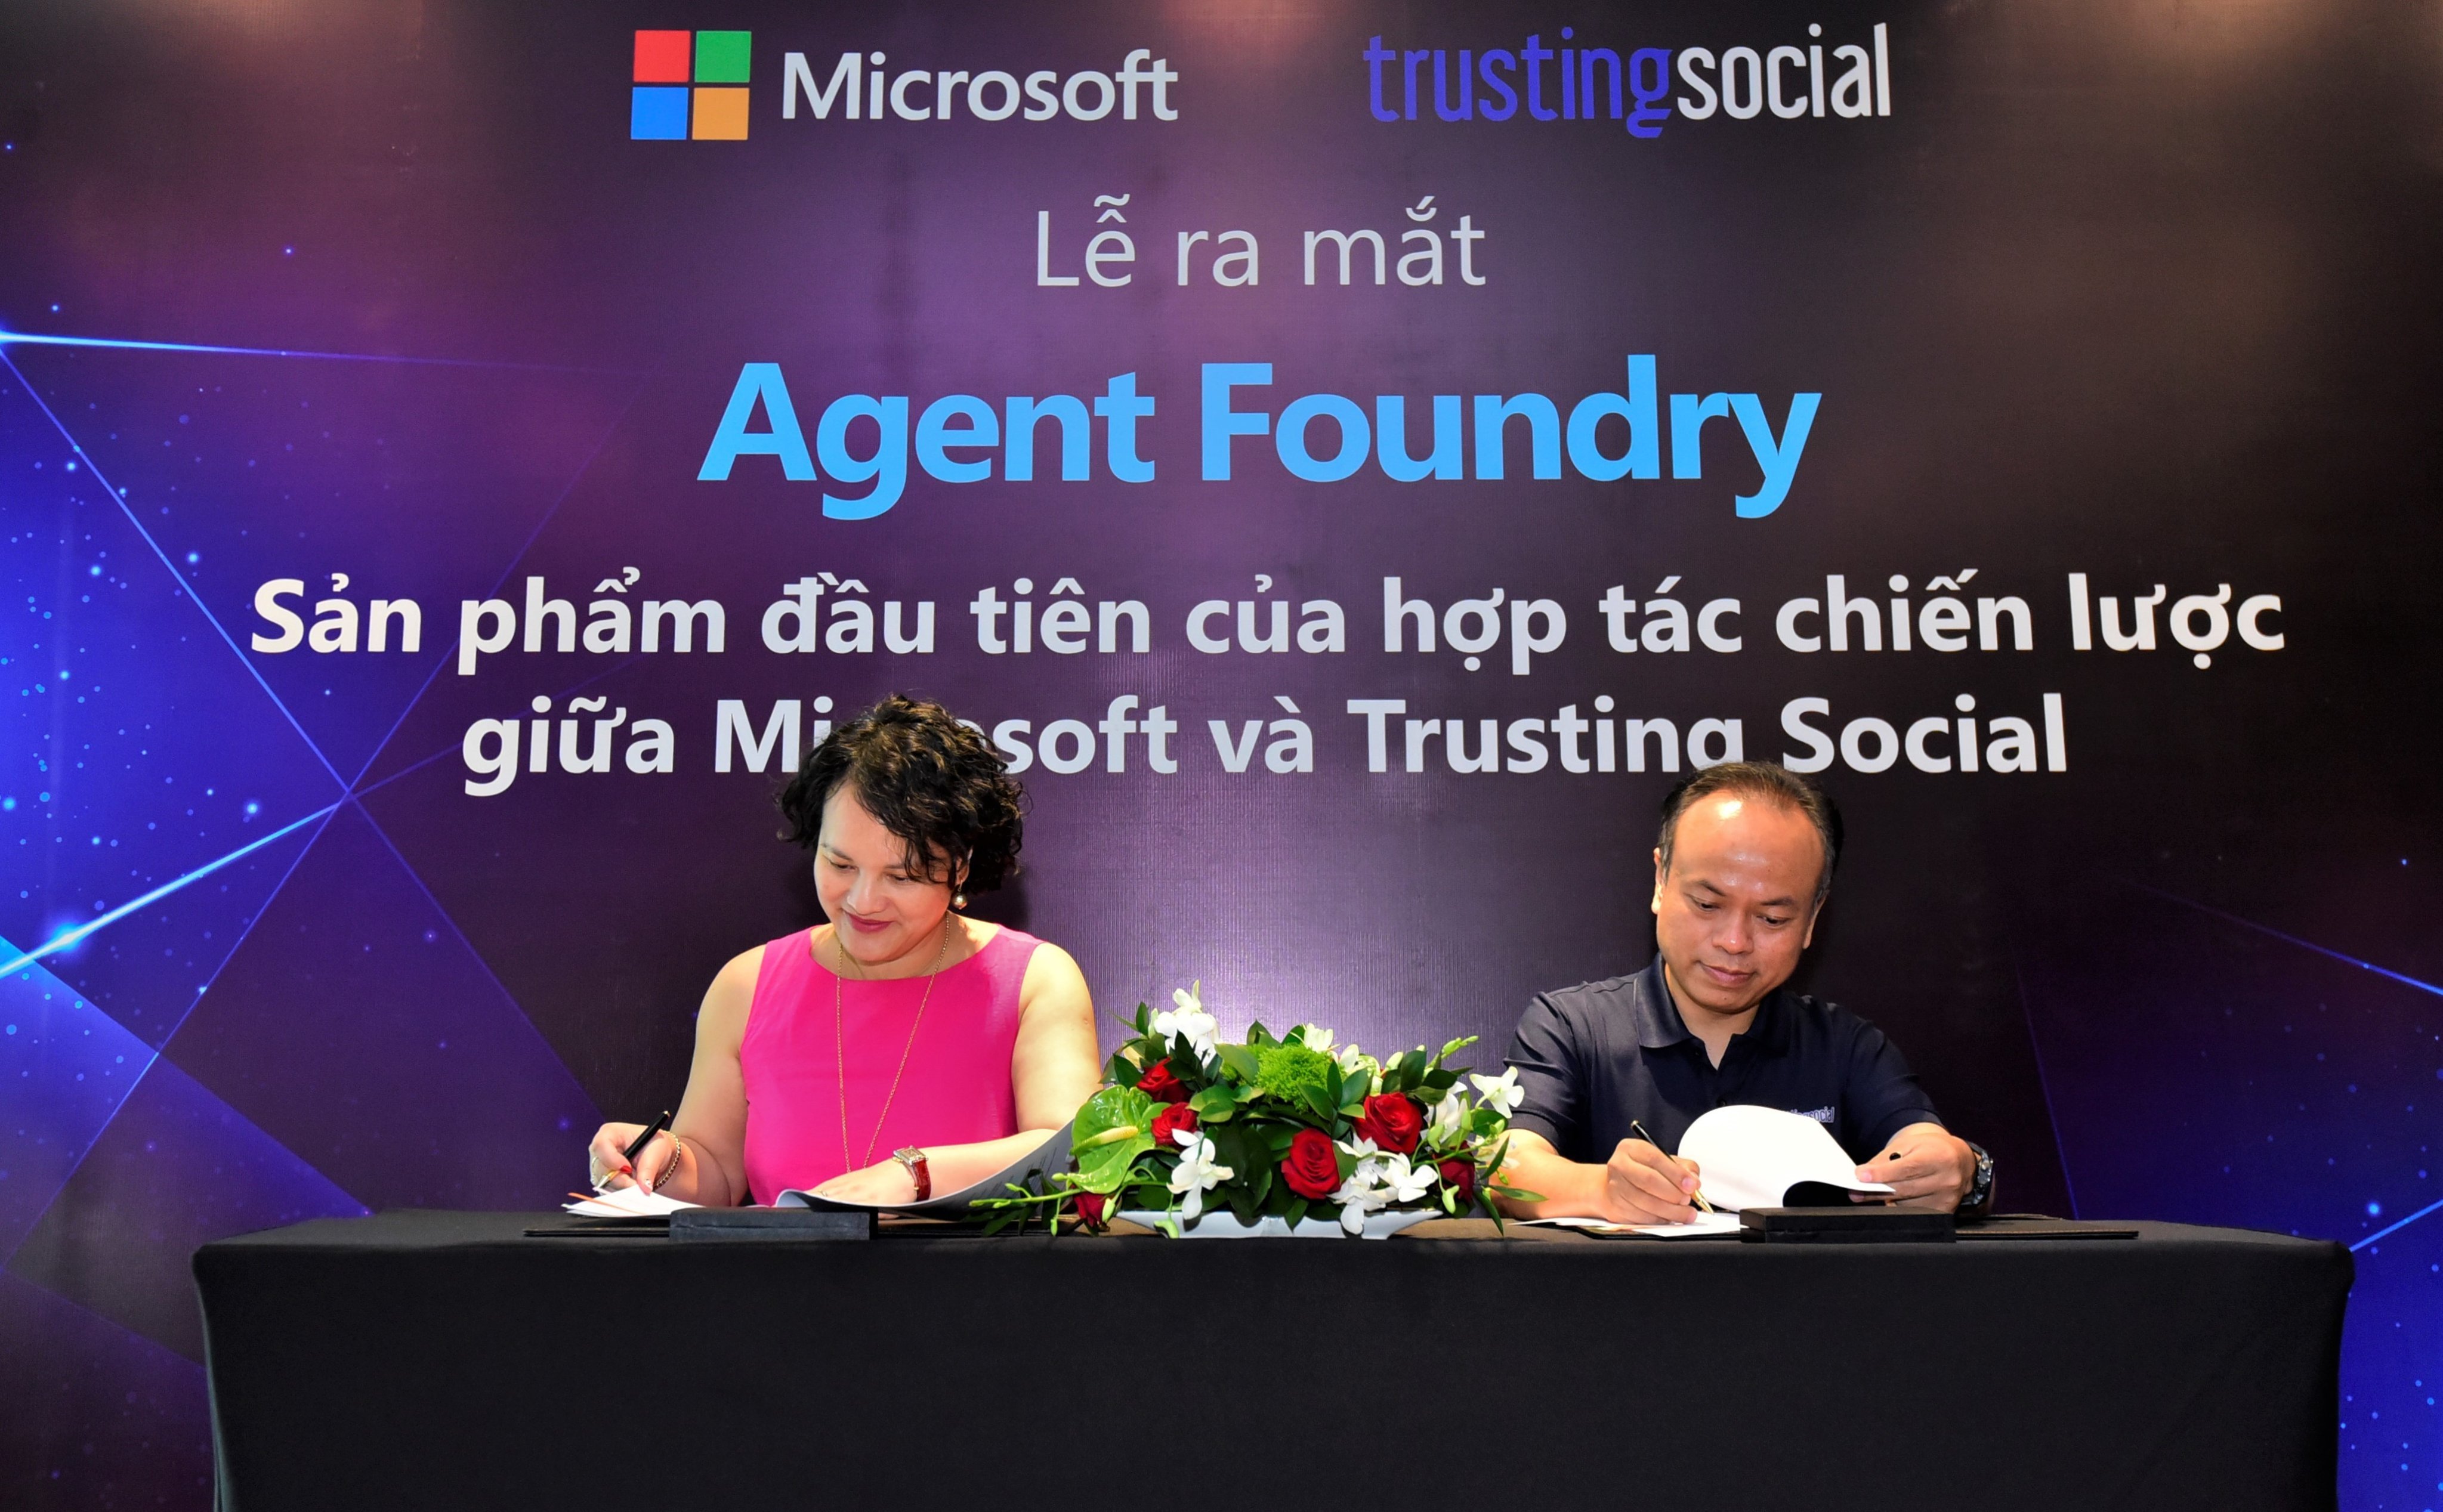 Trusting Social will integrate Microsoft Azure cloud computing platform, services, solutions, and other technologies in connection with data analytics, OpenAI, and cognitive services for an Azure AI project.